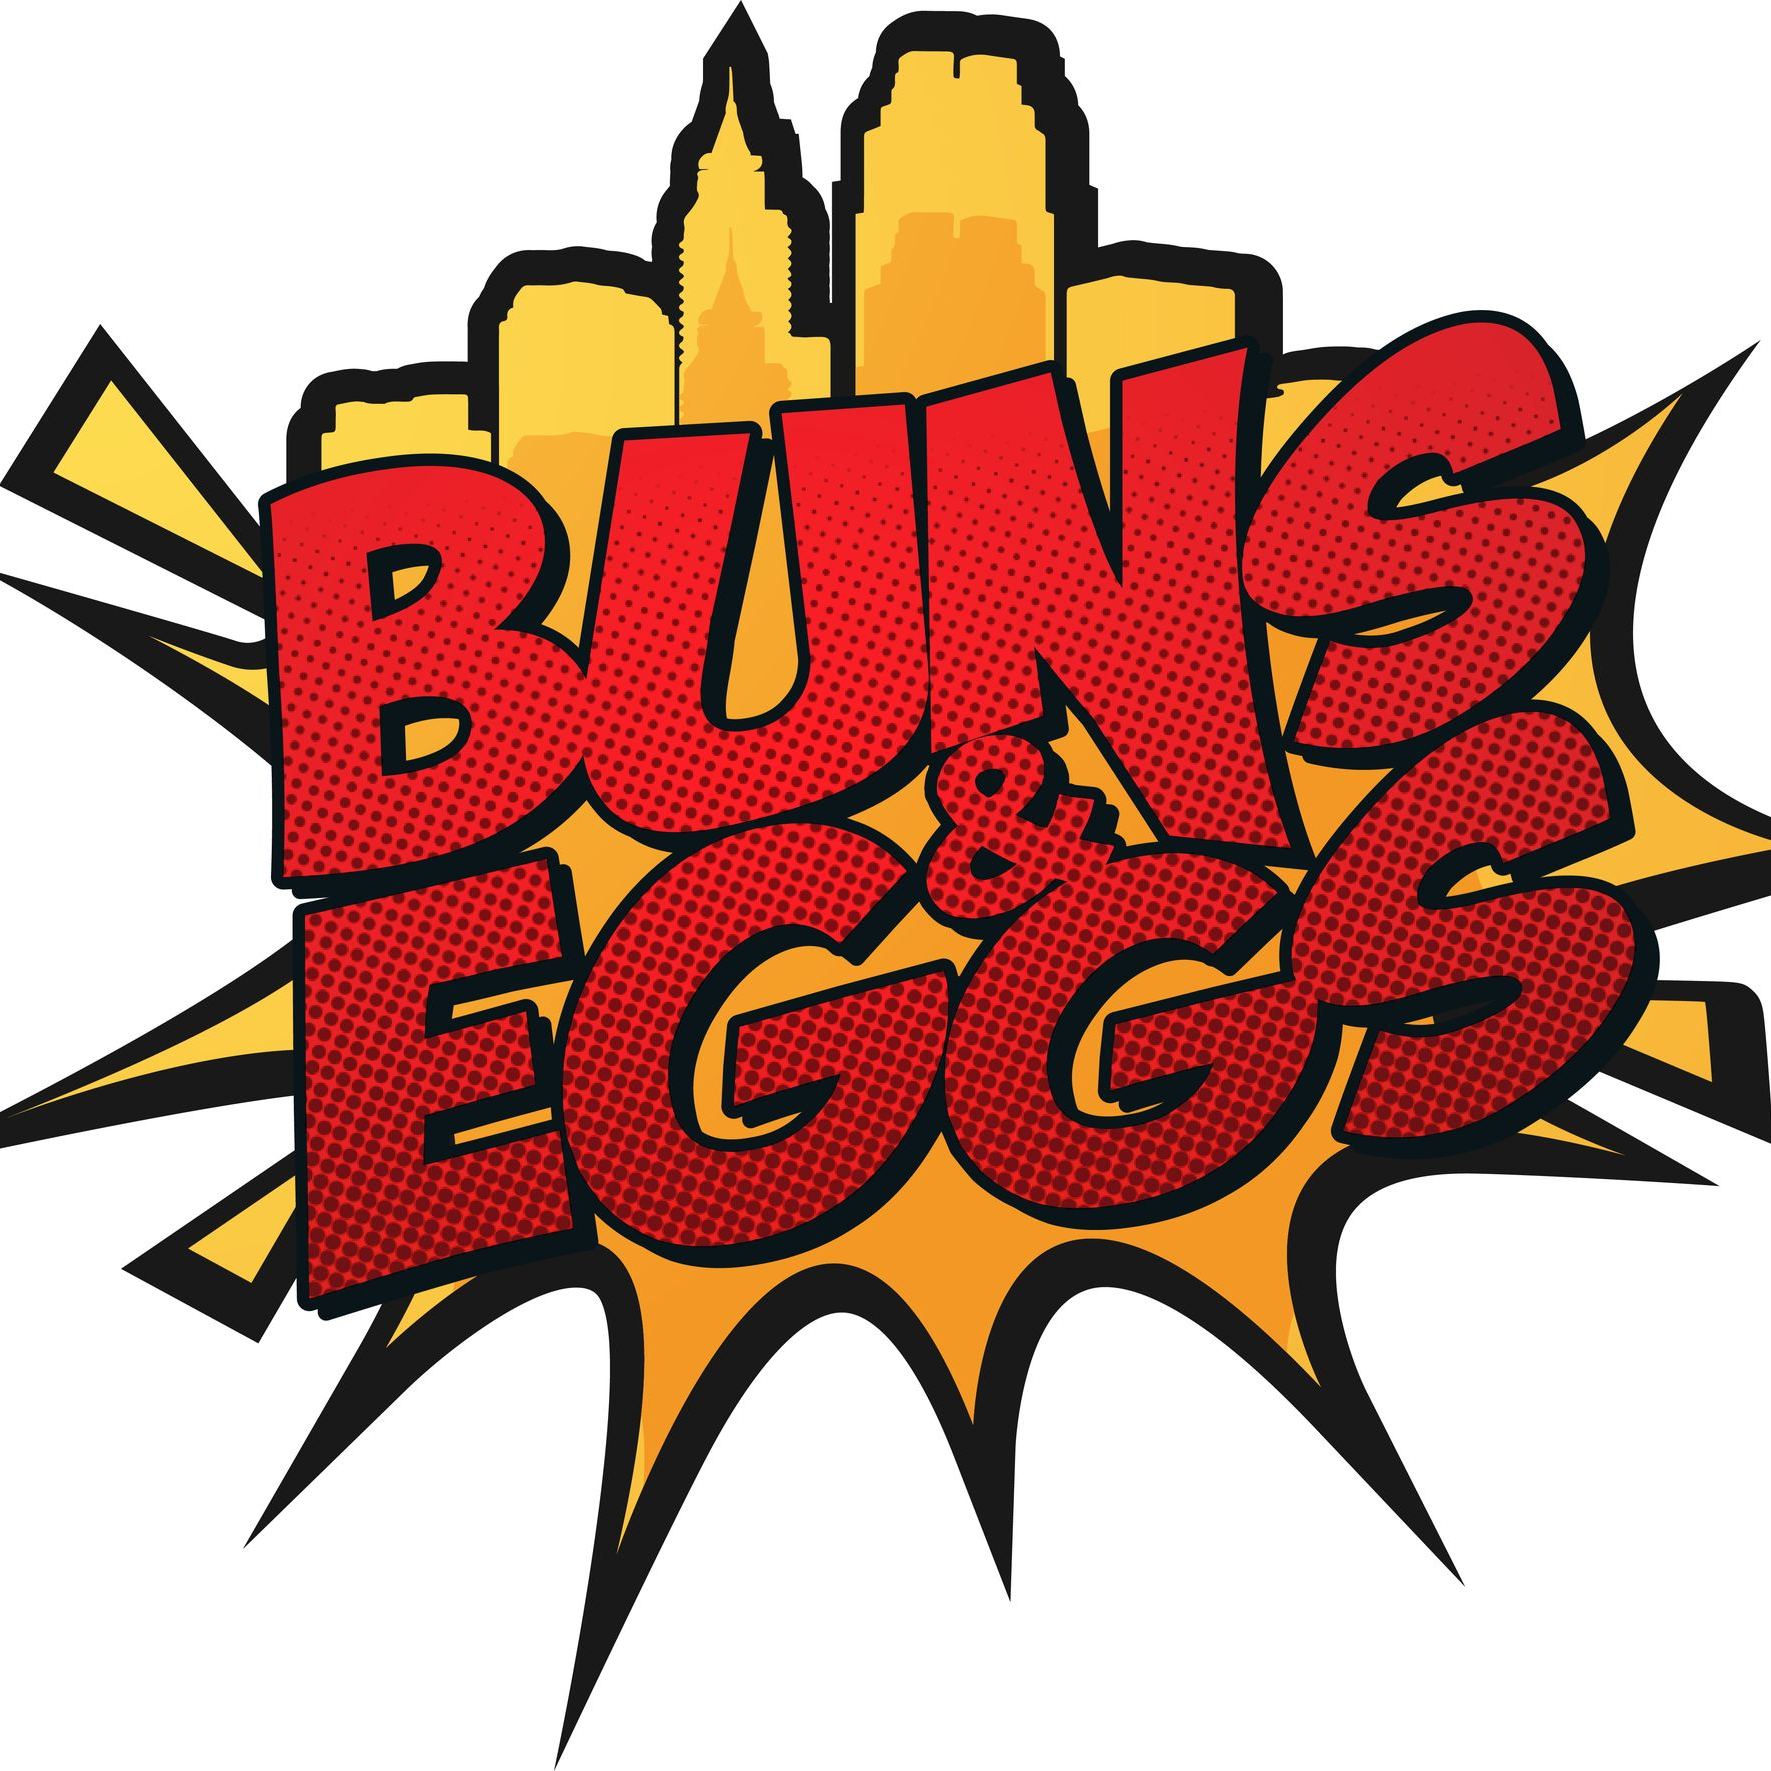 Buns and Eggs